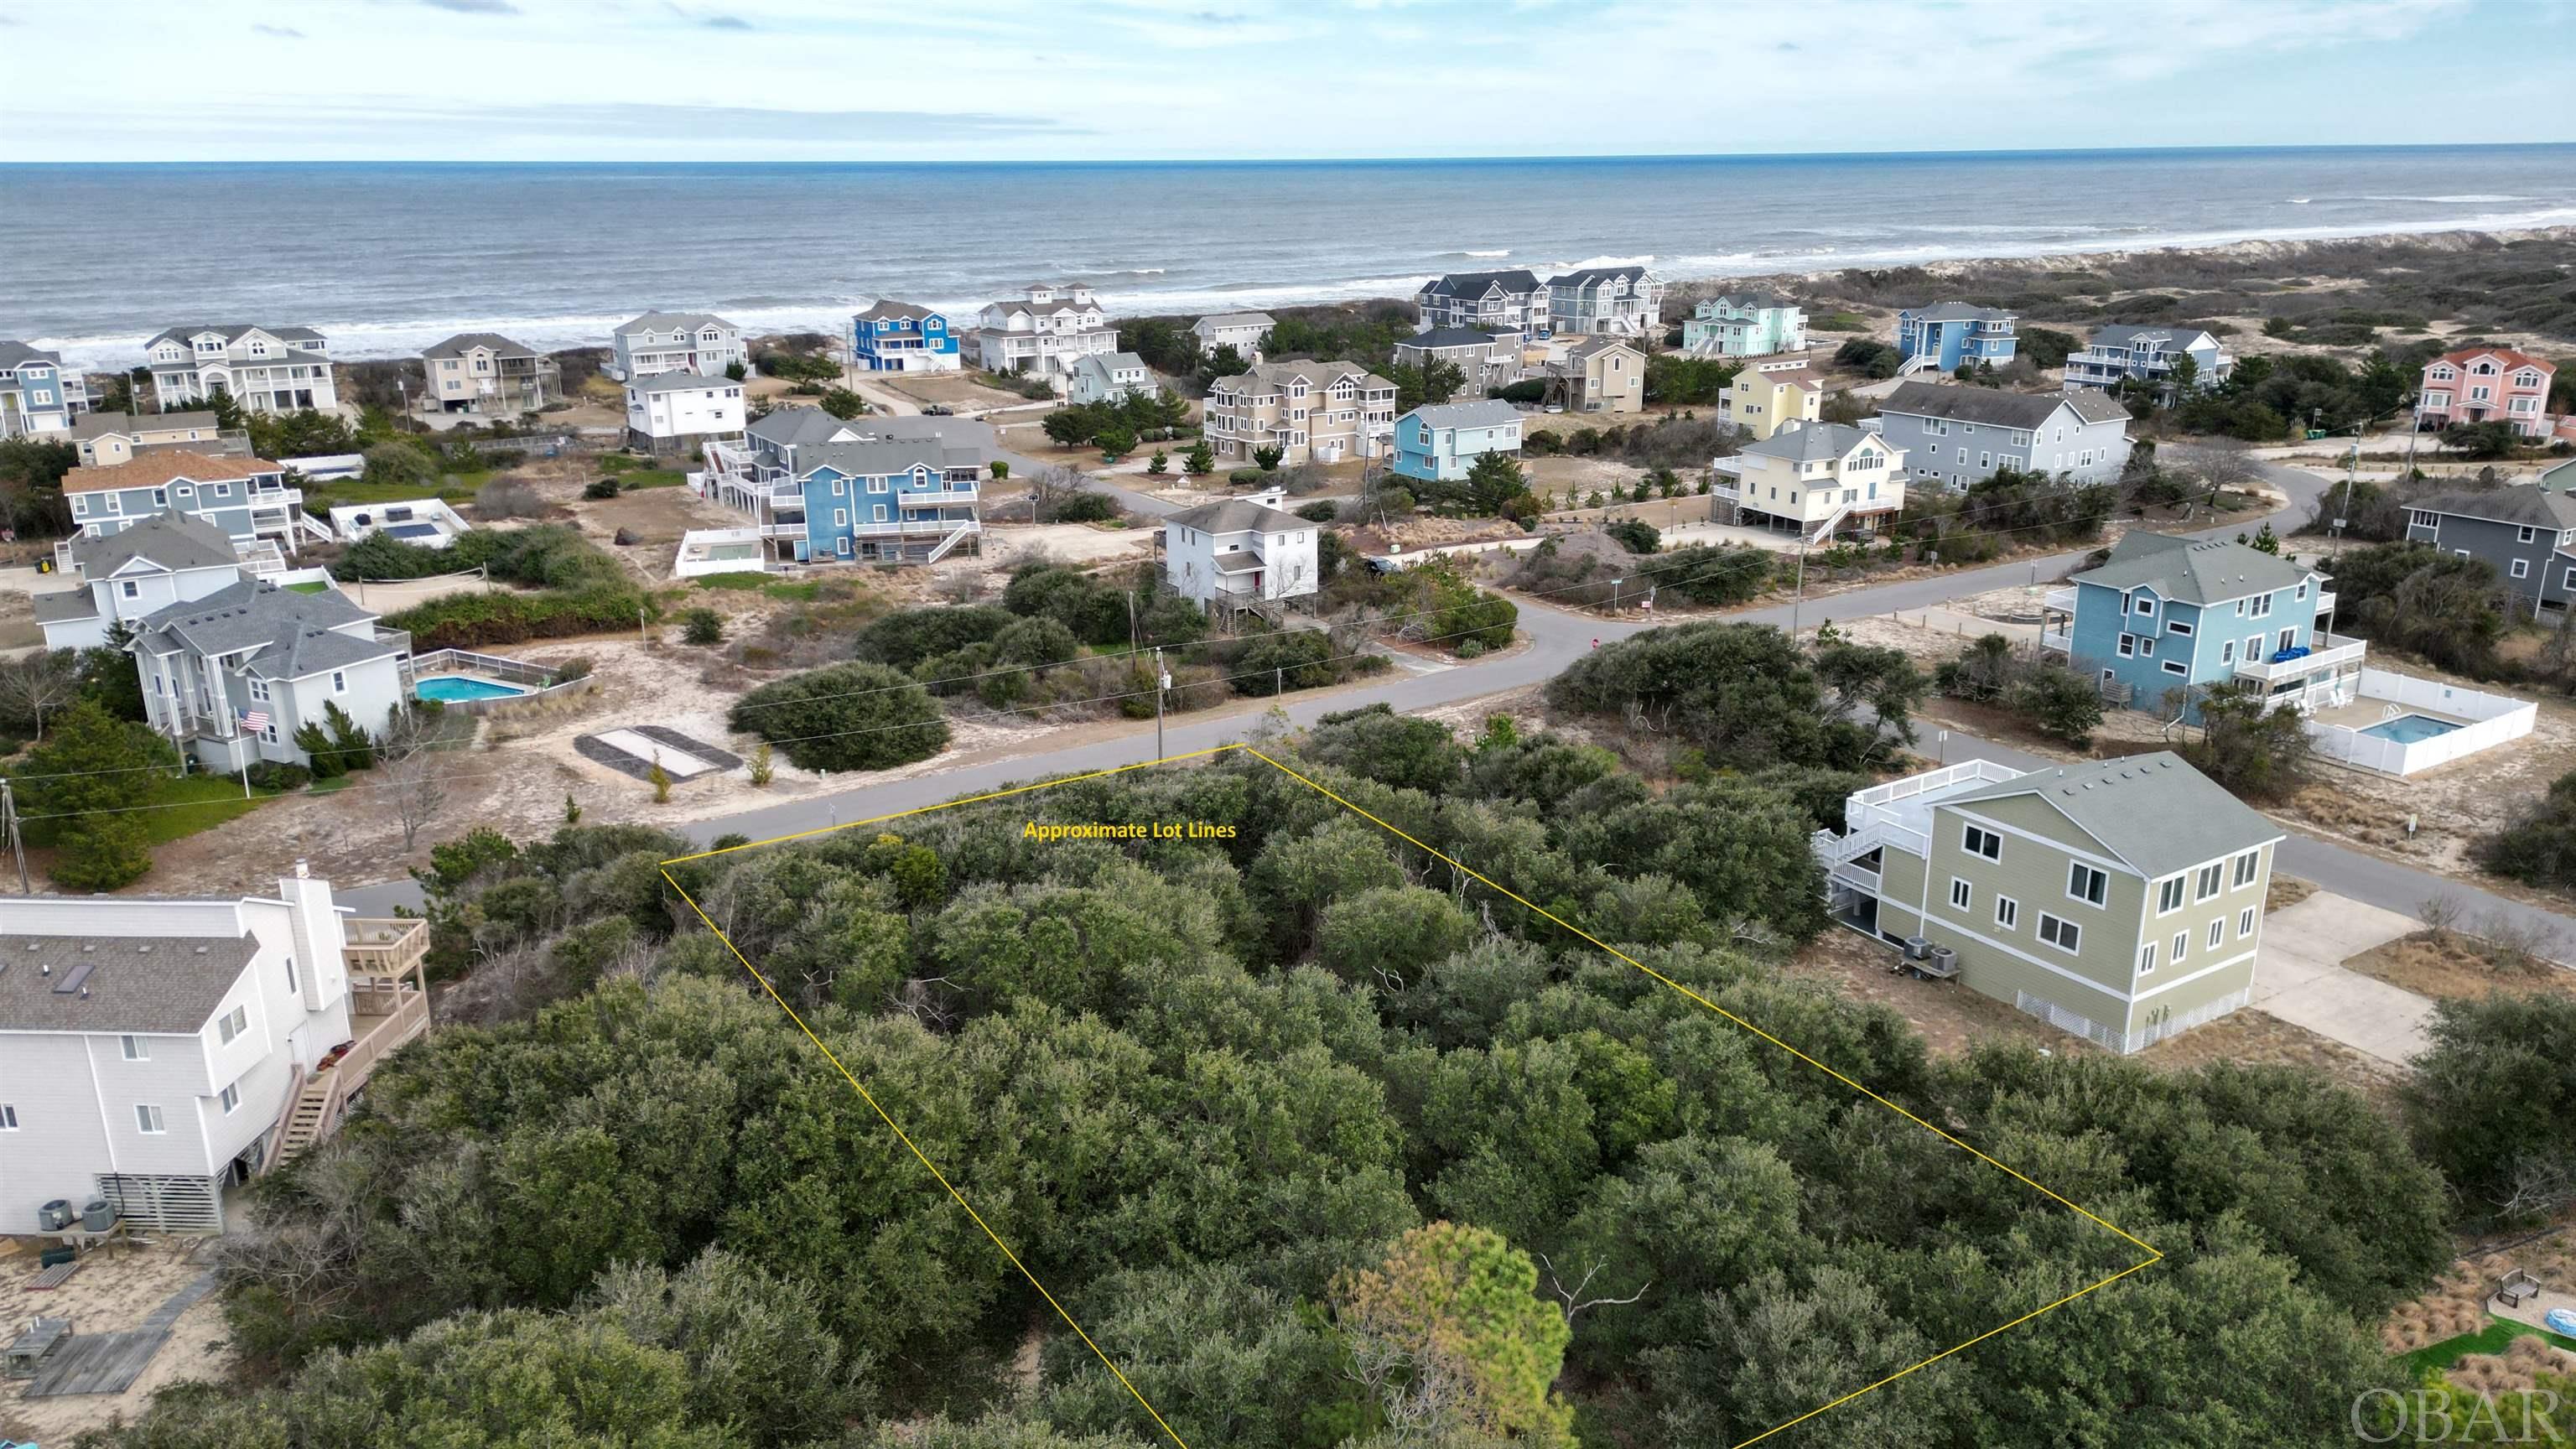 Ideally situated between The Currituck Club golf course and a beautiful wide beach in Corolla, this is one of very few remaining undeveloped oceanside lots in the Ocean Sands South community.  Located on a cul-de-sac with a boardwalk to community beach access at the end, this lot lays well and with a 3-story home may offer golf and ocean views from the top level.  Pick from two different boardwalks that lead you to the beach over a strong sand dune protecting this section of Ocean Sands (Breakers Arch and Ocean Way) - either route is just a 3 minute walk from this lot to the beach.  This lot is unique because it offers more than 1/2 acre of undeveloped land just steps to the ocean - plenty of room to build that dream beach house or investment property!  Over half an acre, X flood zone, potential ocean views and ideally situated in Corolla NC - just minutes away from the wild horses of Carova, the Whalehead Club, the Rees Jones golf course at The Currituck Club and so much more!